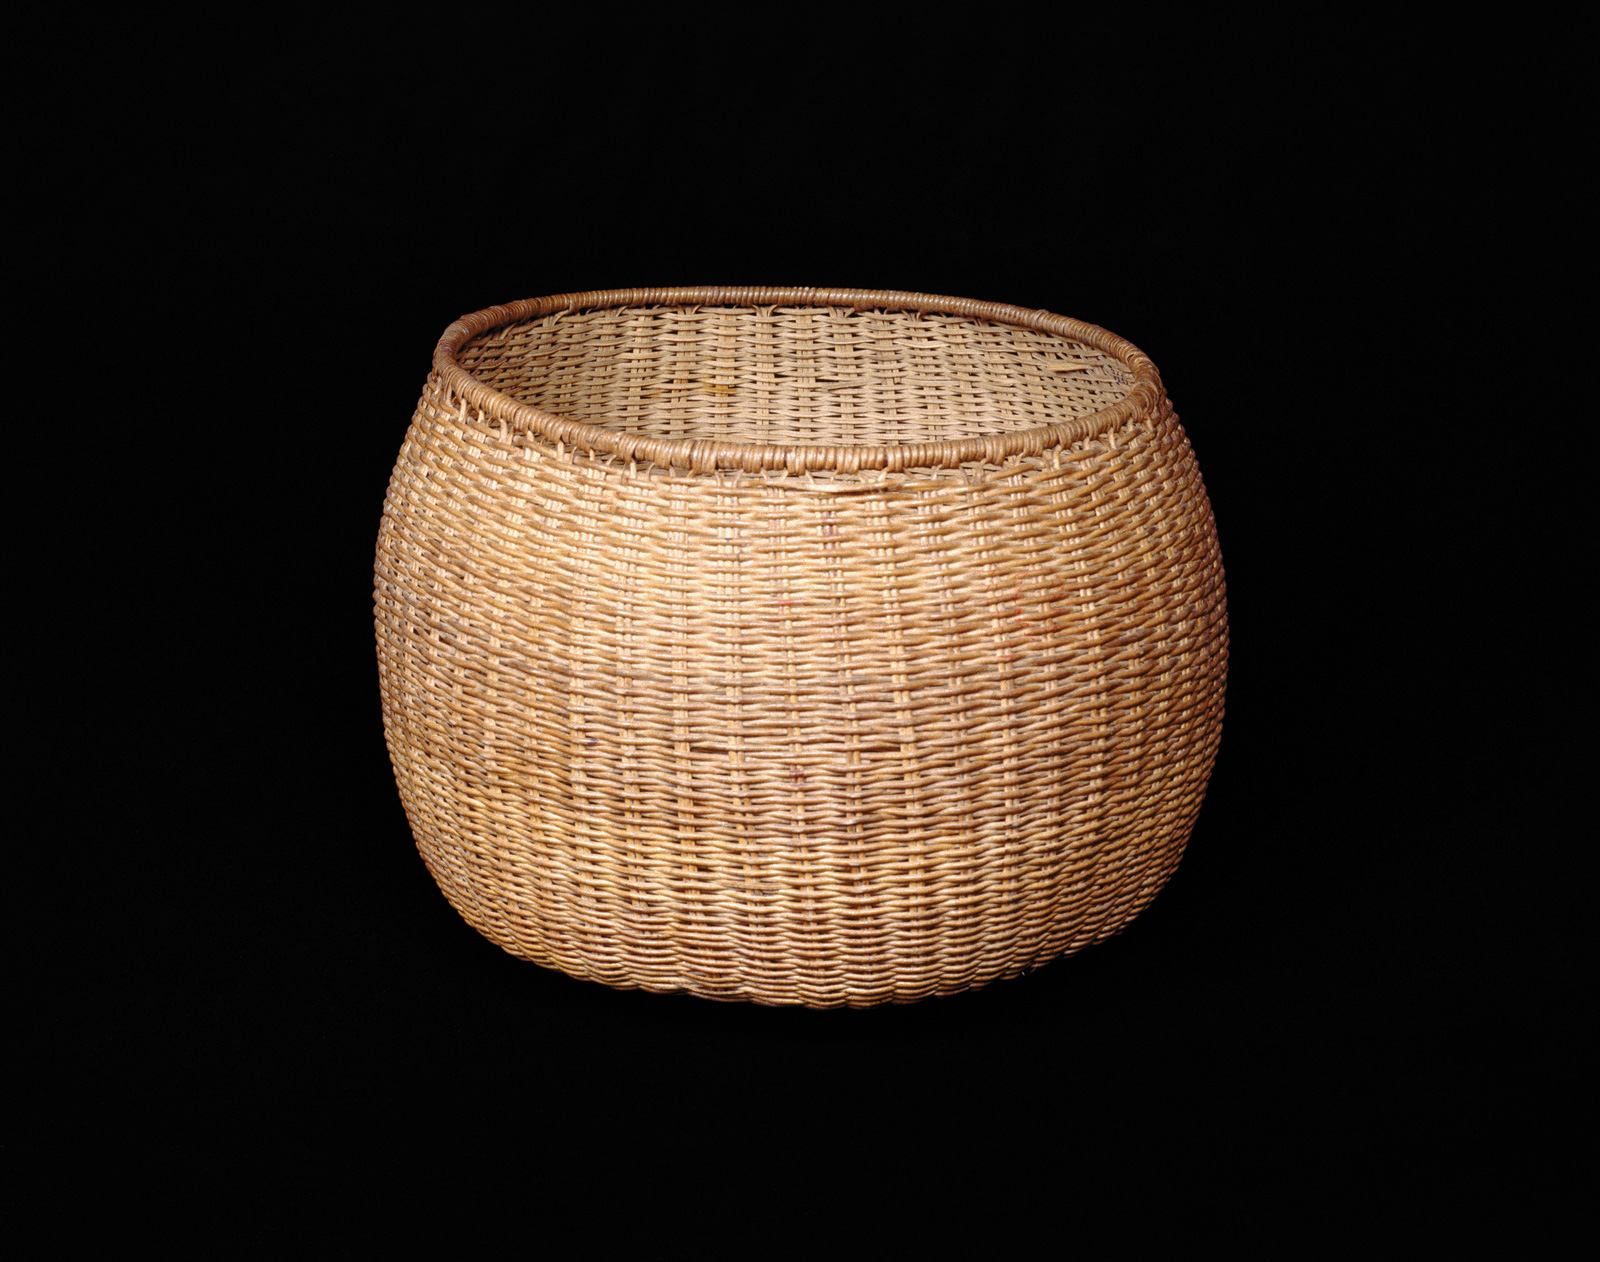 This robust basket made of mamure fibers is another example of the beautiful Baré basketmaking.